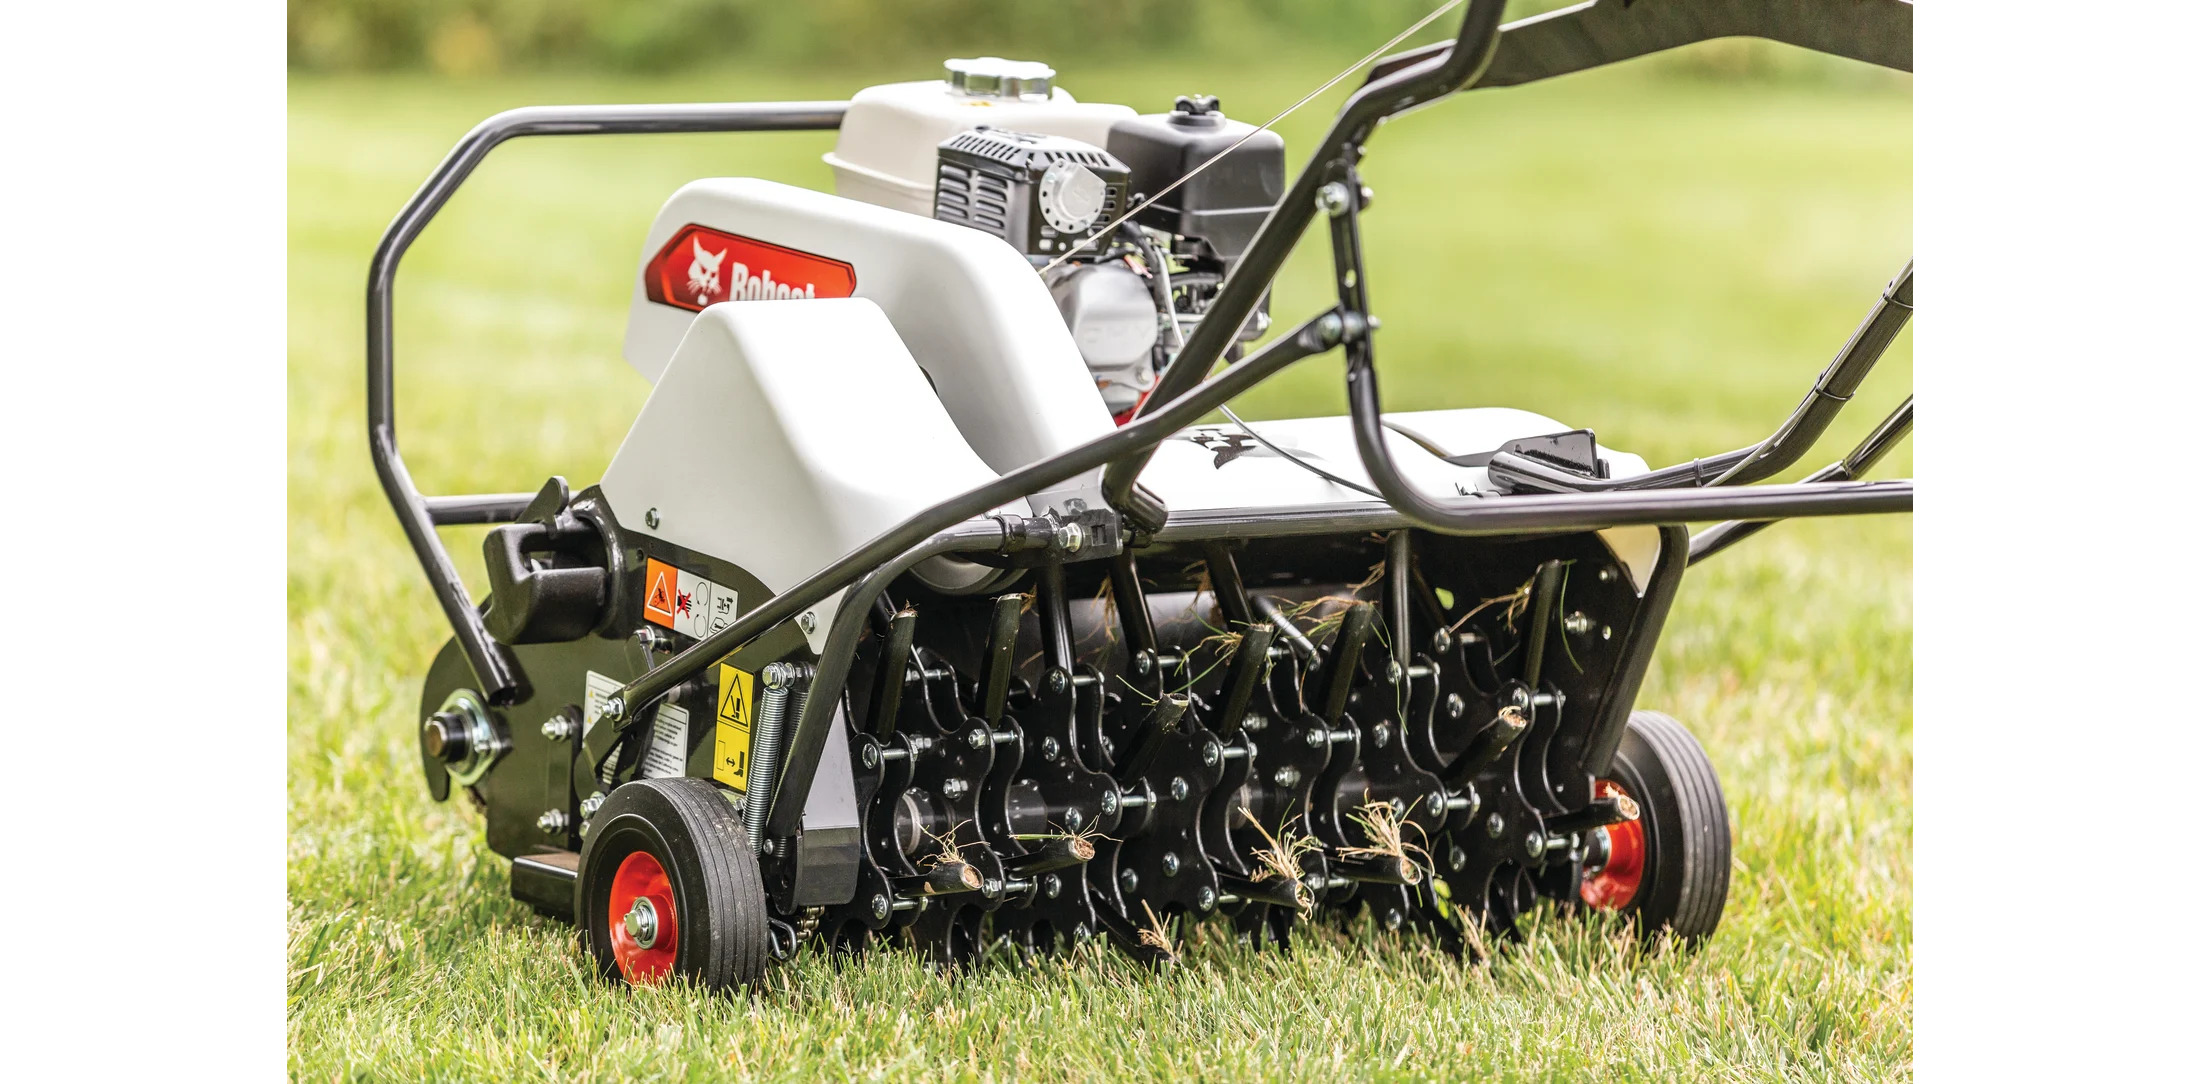 Browse Specs and more for the Bobcat AE26 Walk-Behind Aerator - Bobcat of Huntsville